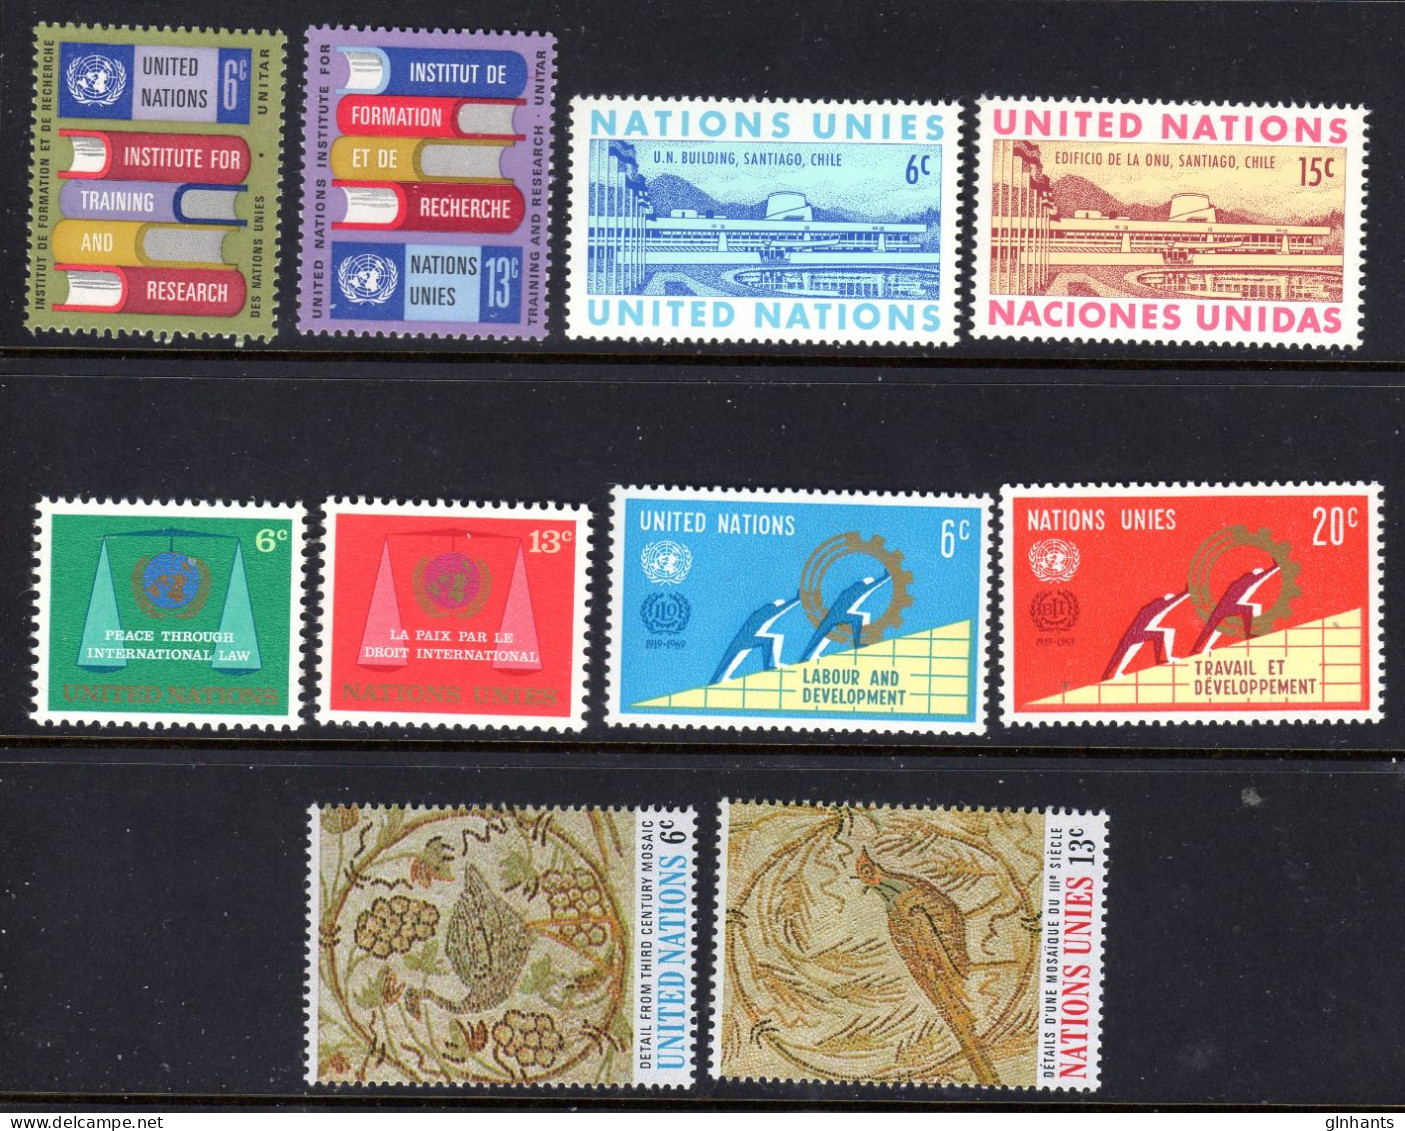 UNITED NATIONS UN NEW YORK - 1969 COMPLETE YEAR SET (10V) AS PICTURED FINE MNH ** SG 193-202 - Ongebruikt